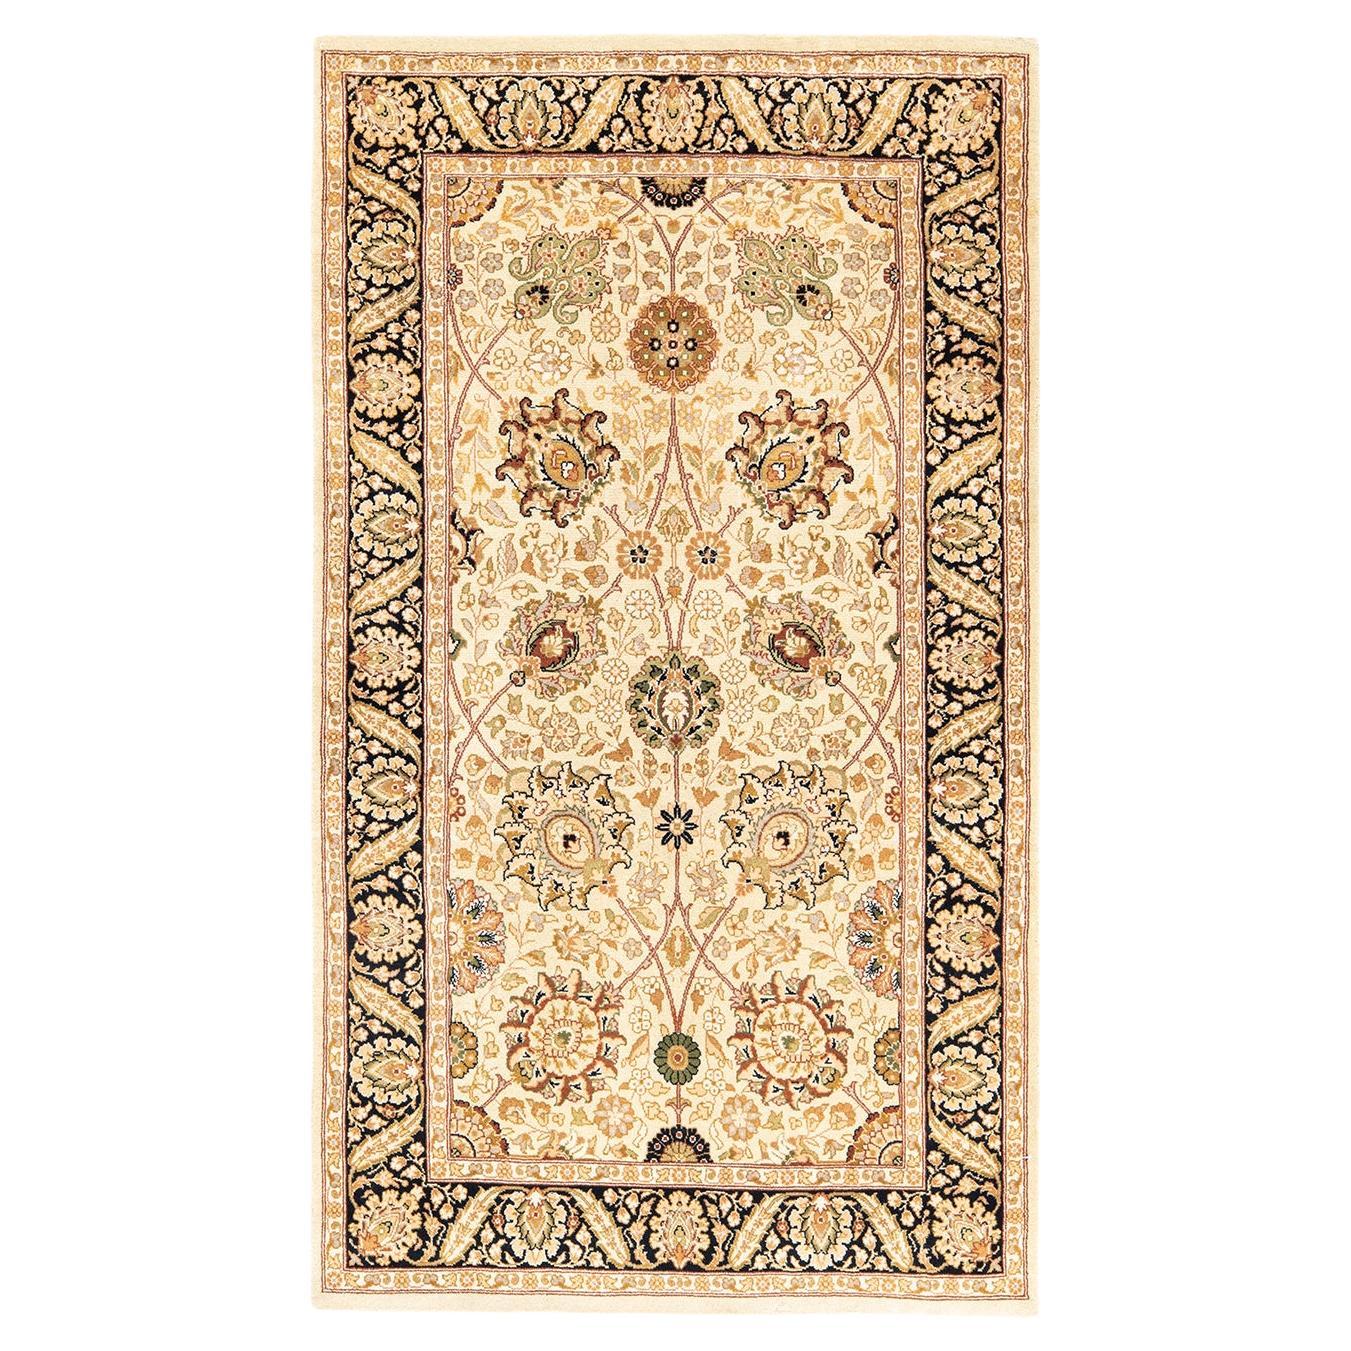 One-of-a-Kind Hand Knotted Oriental Mogul Beige Area Rug